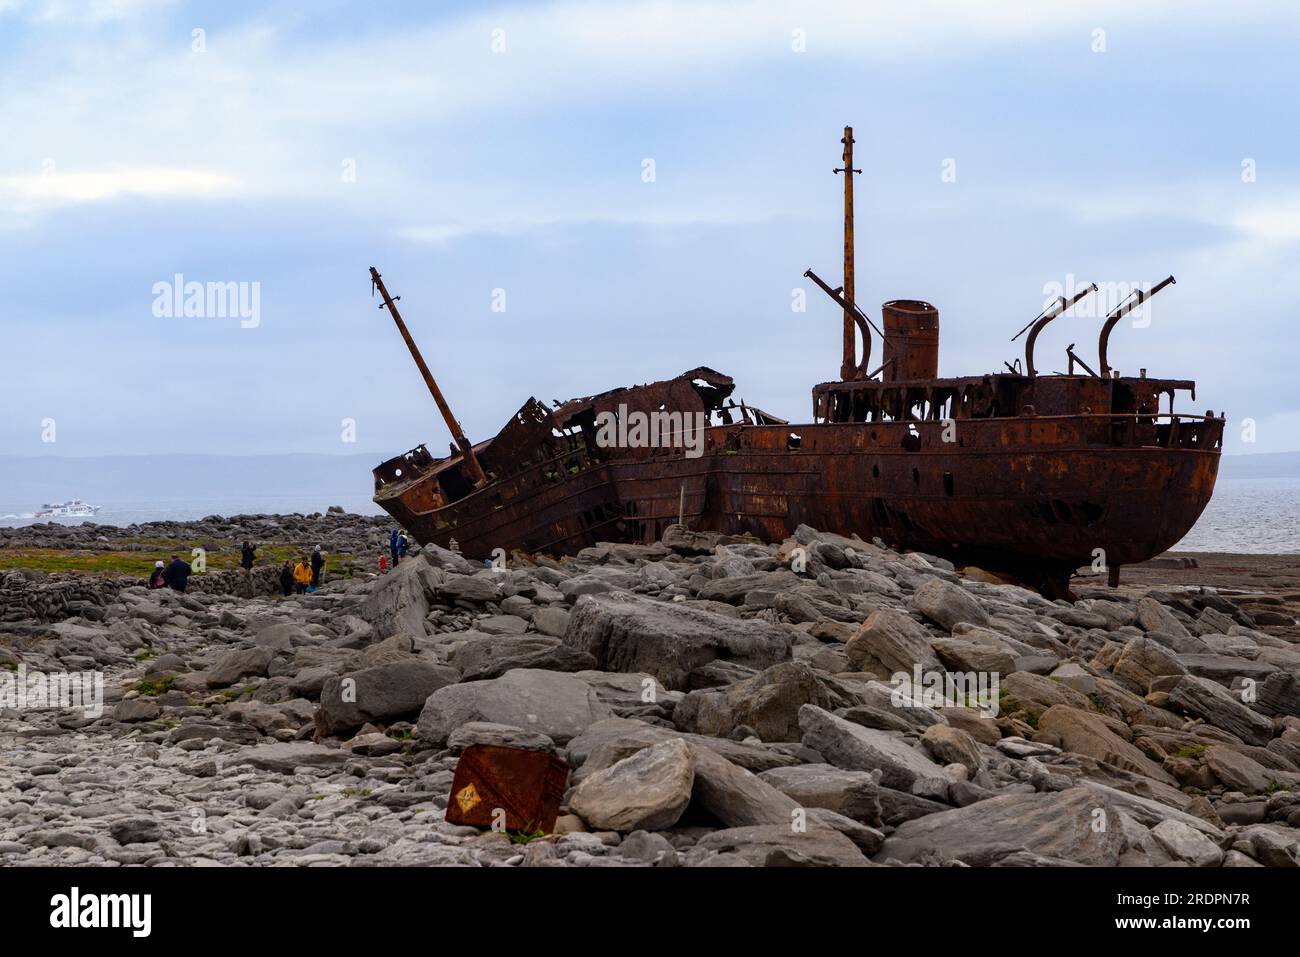 The rusty shipwreck of MV Plassey on Finnis Rock, Inis Oirr or Inisheer, one of the three Aran Islands, Republic of Ireland. Stock Photo